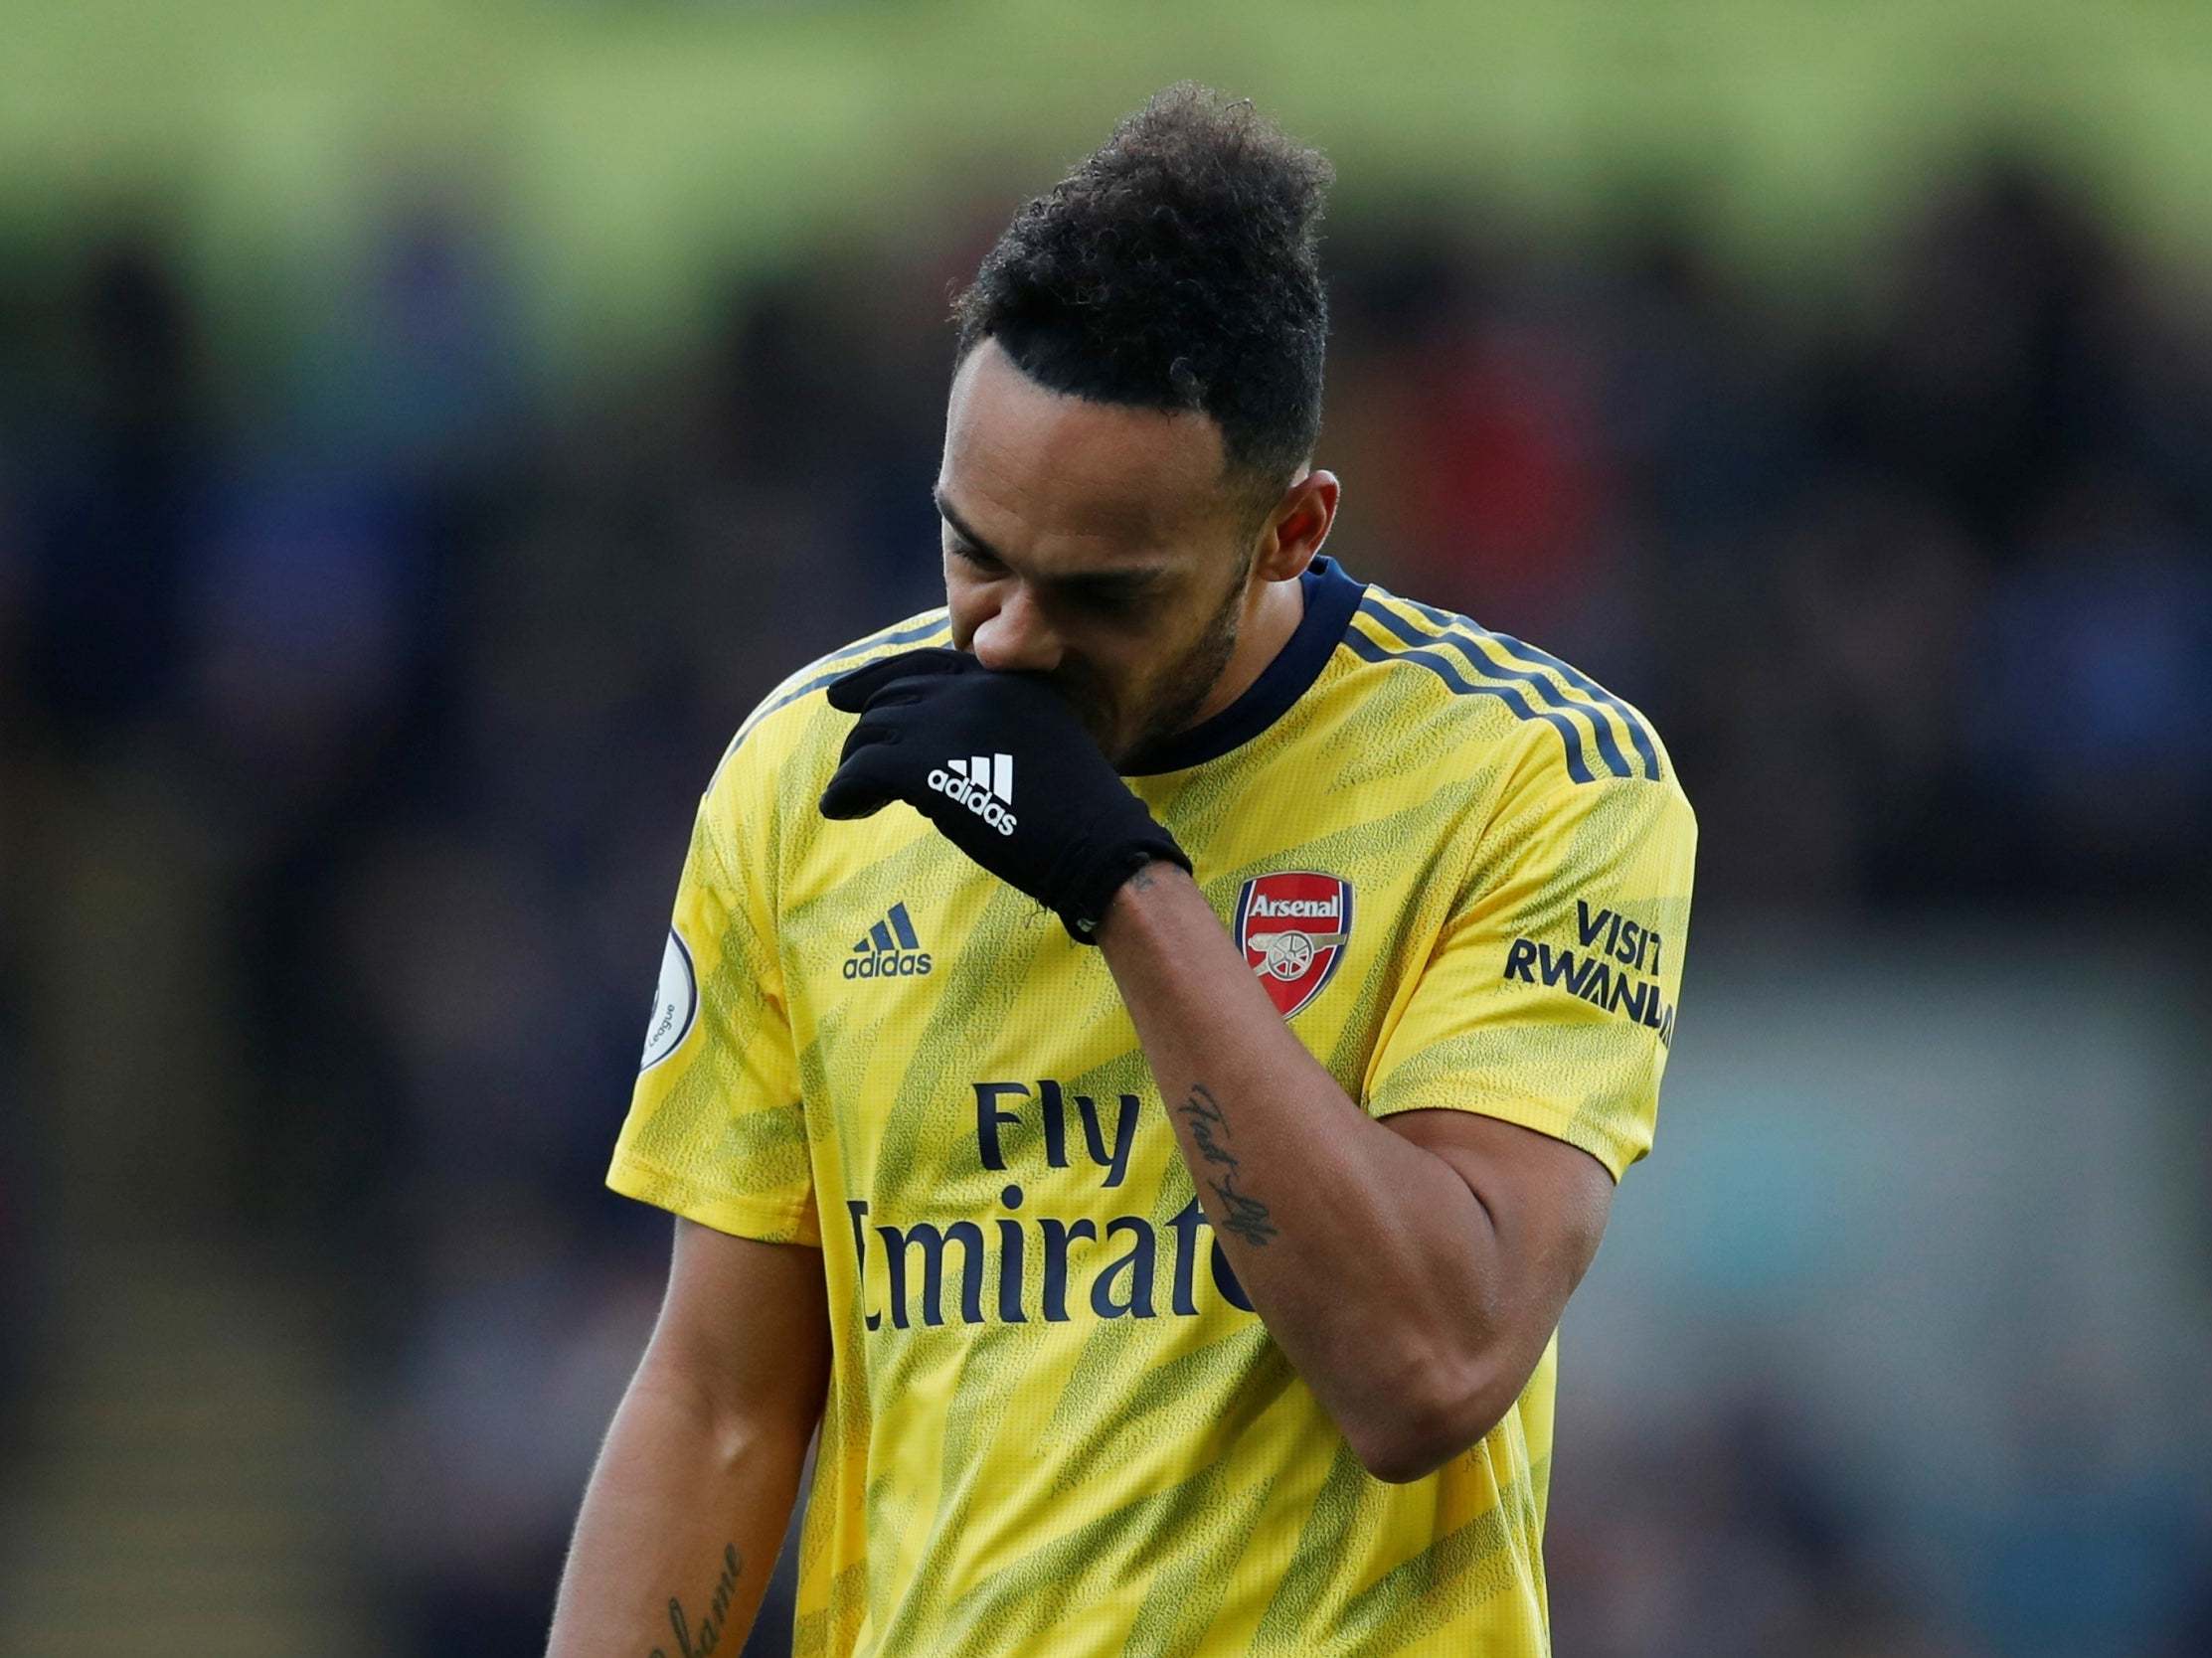 Mikel Arteta issues apology to Crystal Palace's Max Meyer for Pierre-Emerick Aubameyang tackle in Arsenal draw